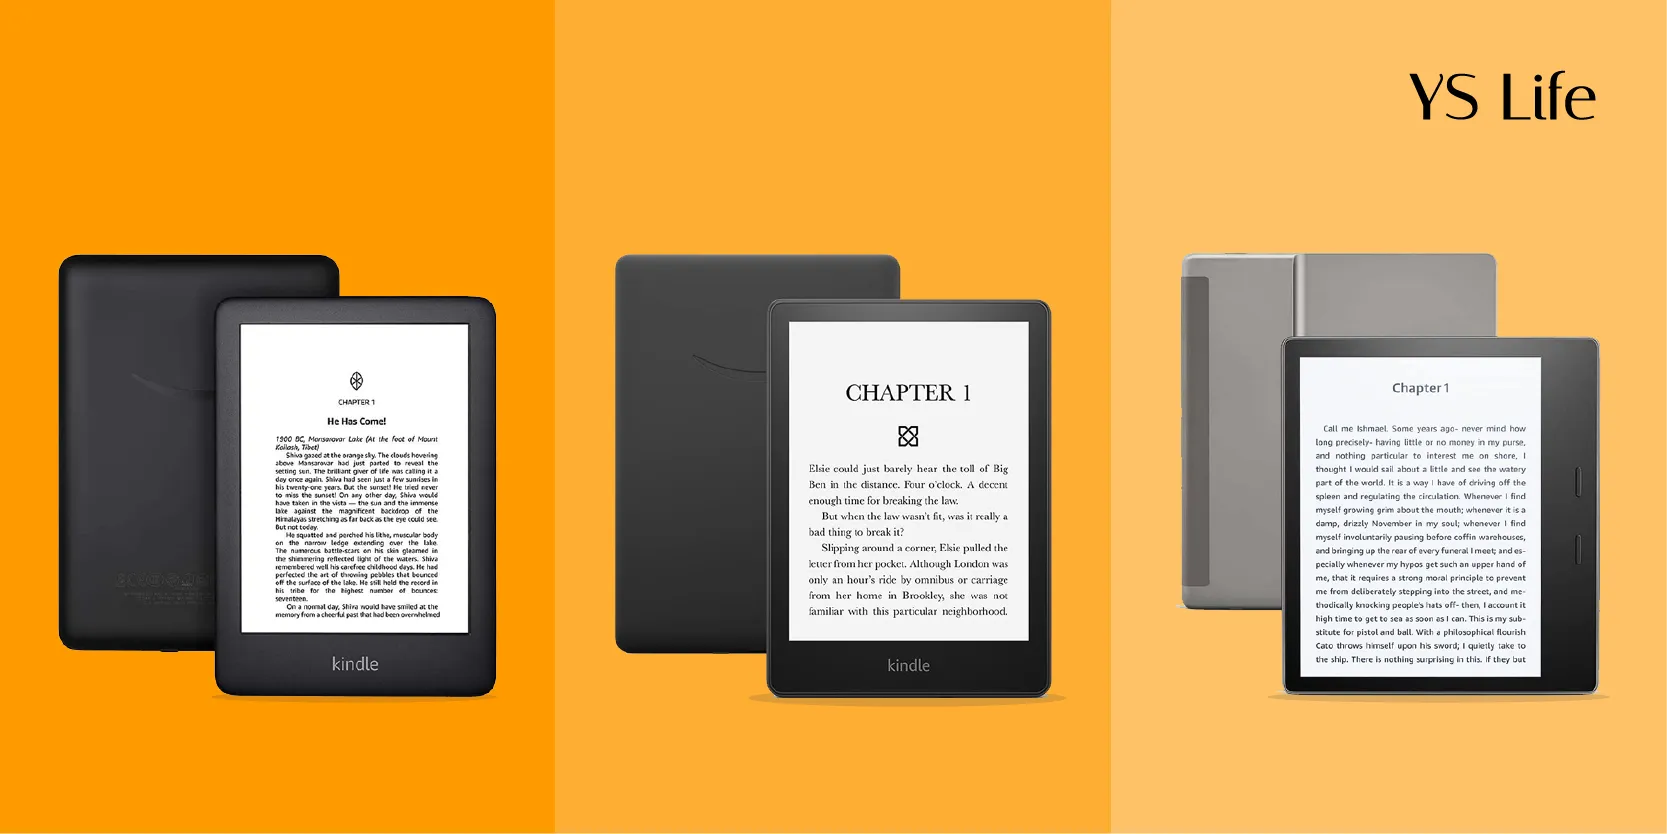 The Kindle Paperwhite now comes in two new colors